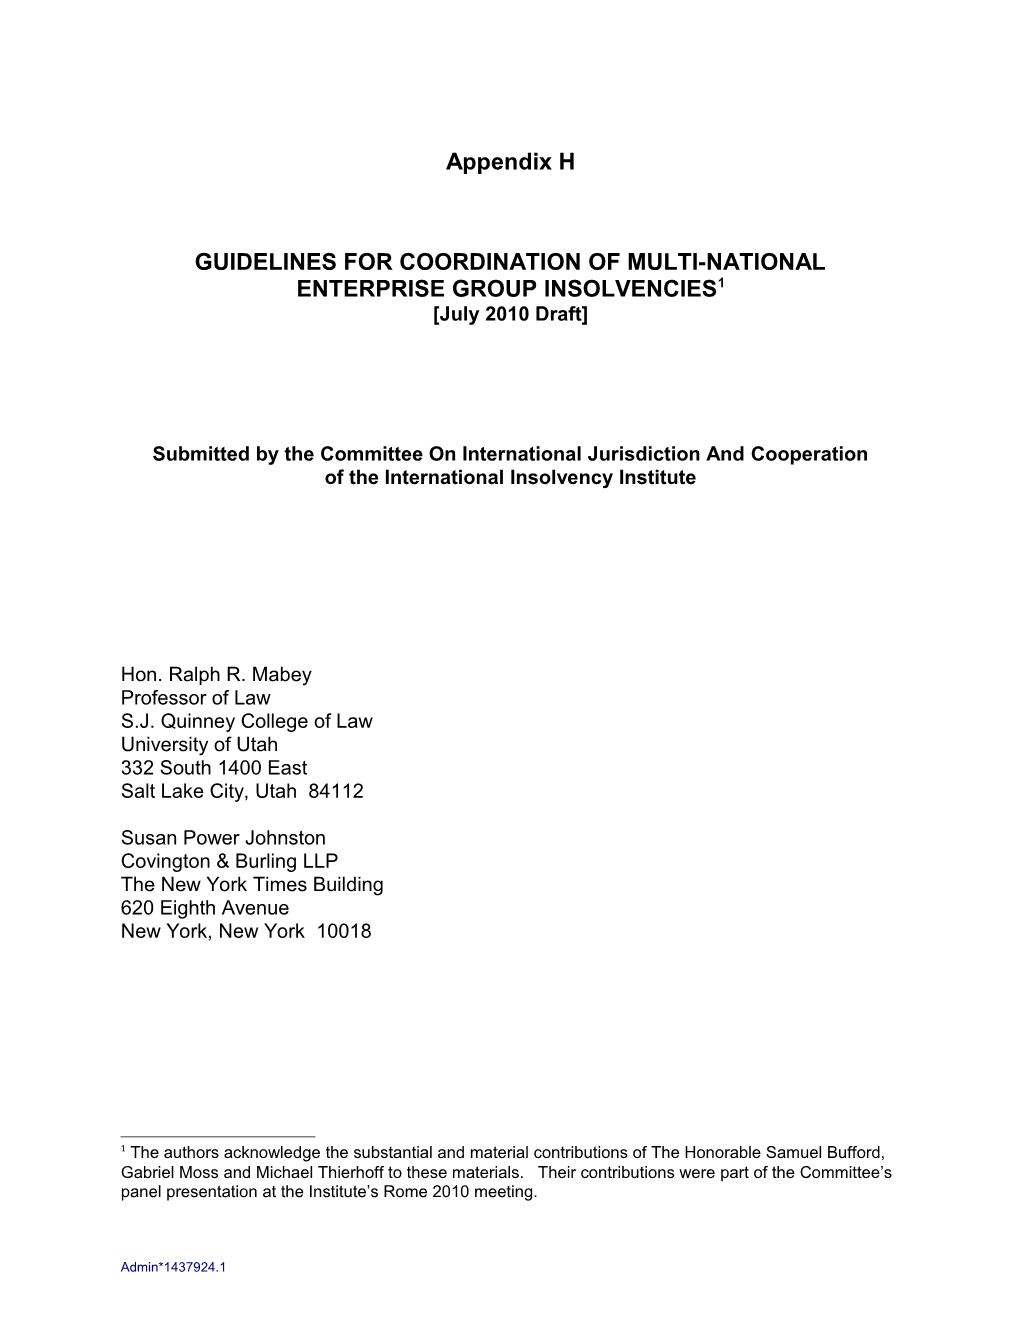 GUIDELINES for COORDINATION of MULTI-NATIONAL ENTERPRISE GROUP INSOLVENCIES 1 July 2010 Draft